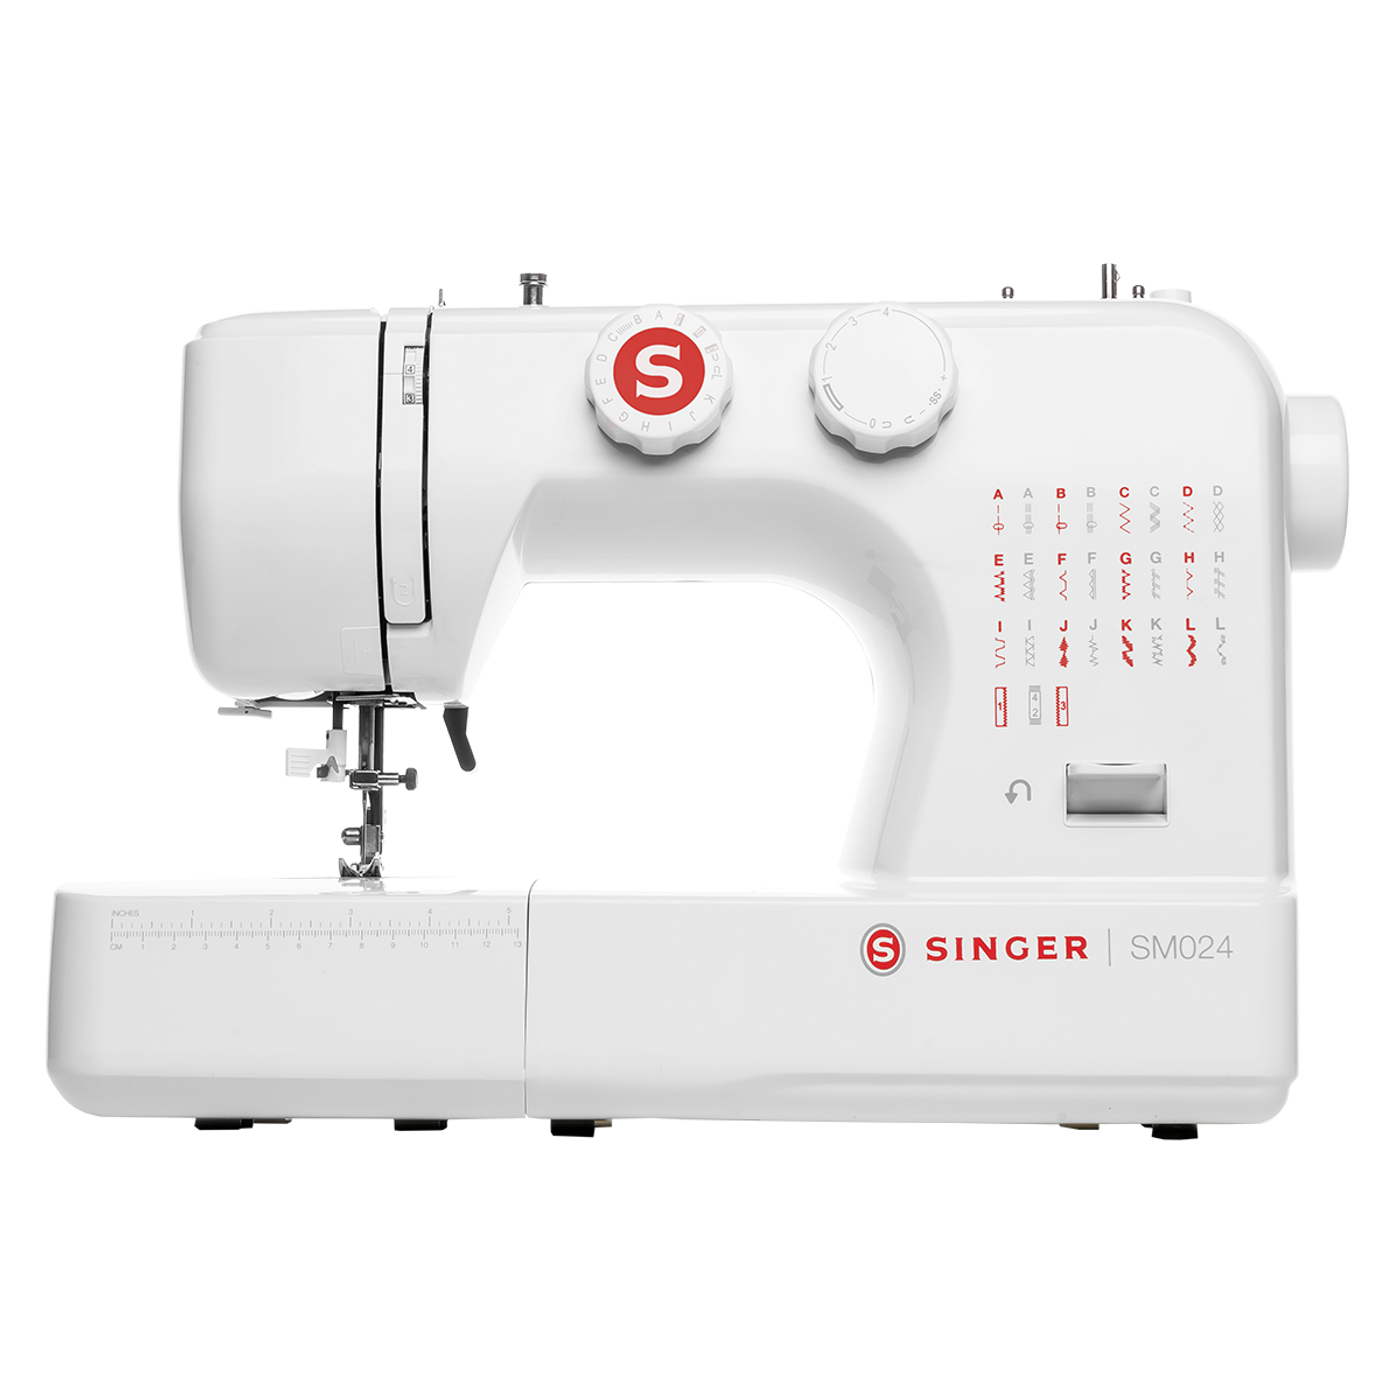  SINGER  SM024 Sewing Machine With Included Accessory